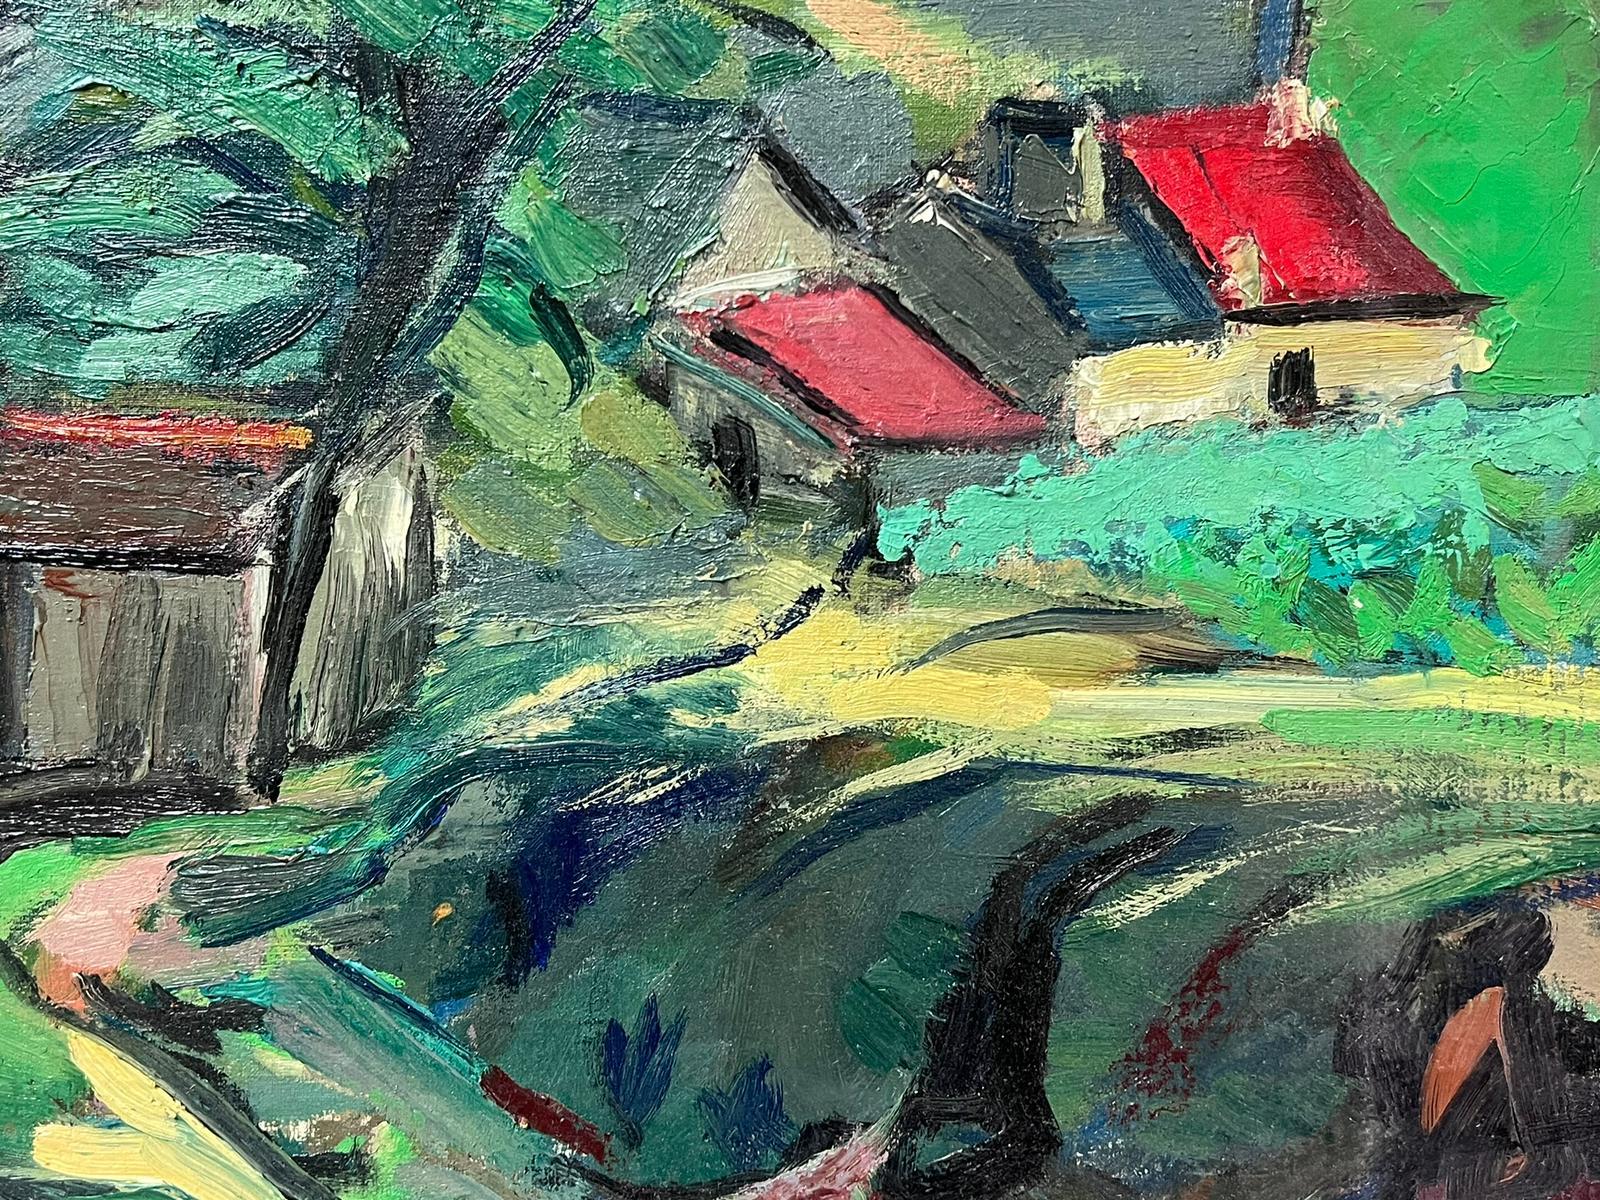 The Woodland Cottage
by Marguerite Lacroux (French/ Swiss  1898-1972)
signed oil on board, unframed
painting: 18 x 24 inches
provenance: private collection, France
condition: very good and original sound condition